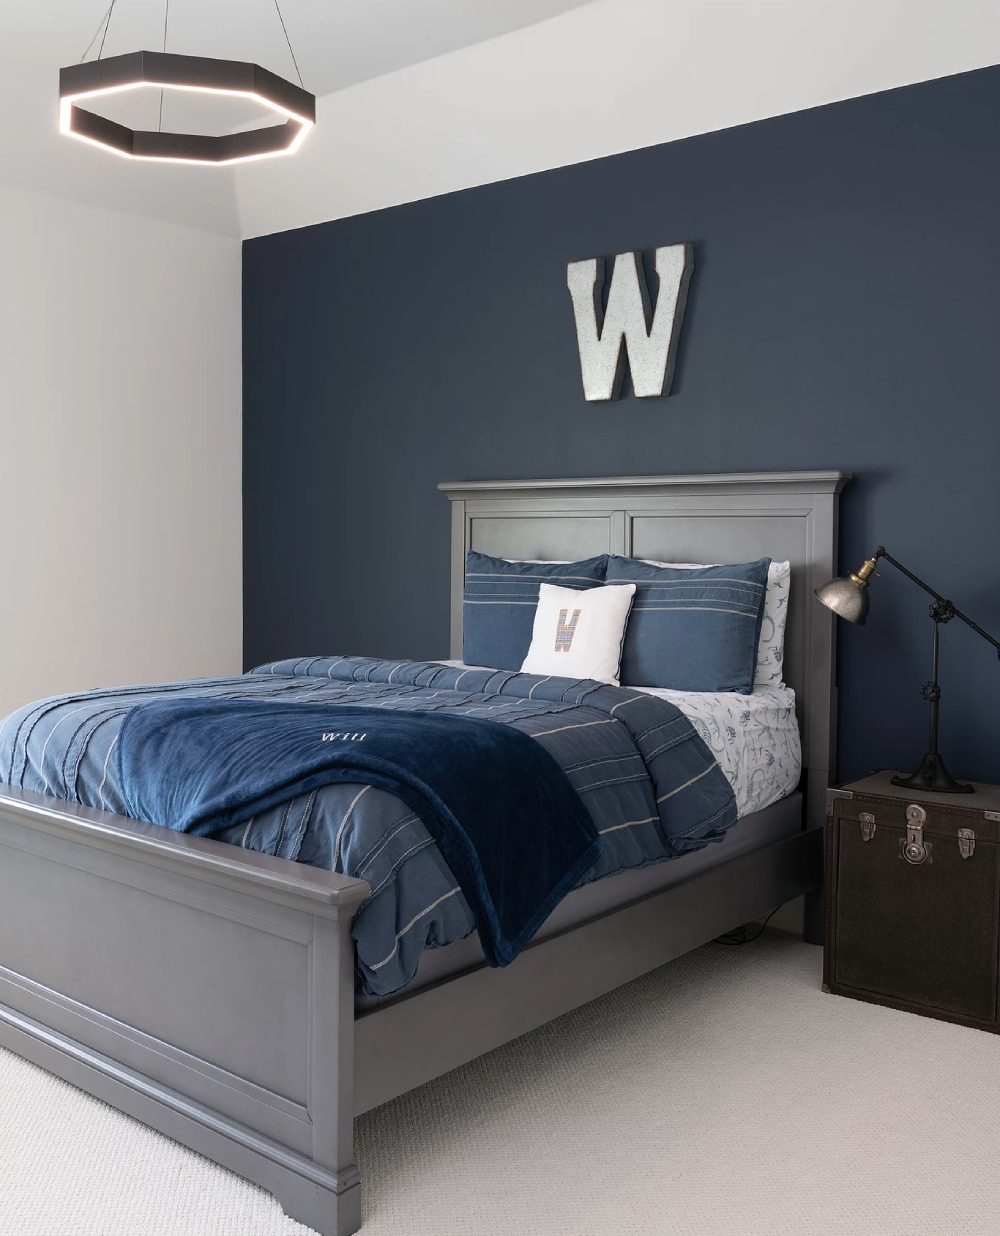 1-5-1 Colors That Go With Navy Blue in Interior Design